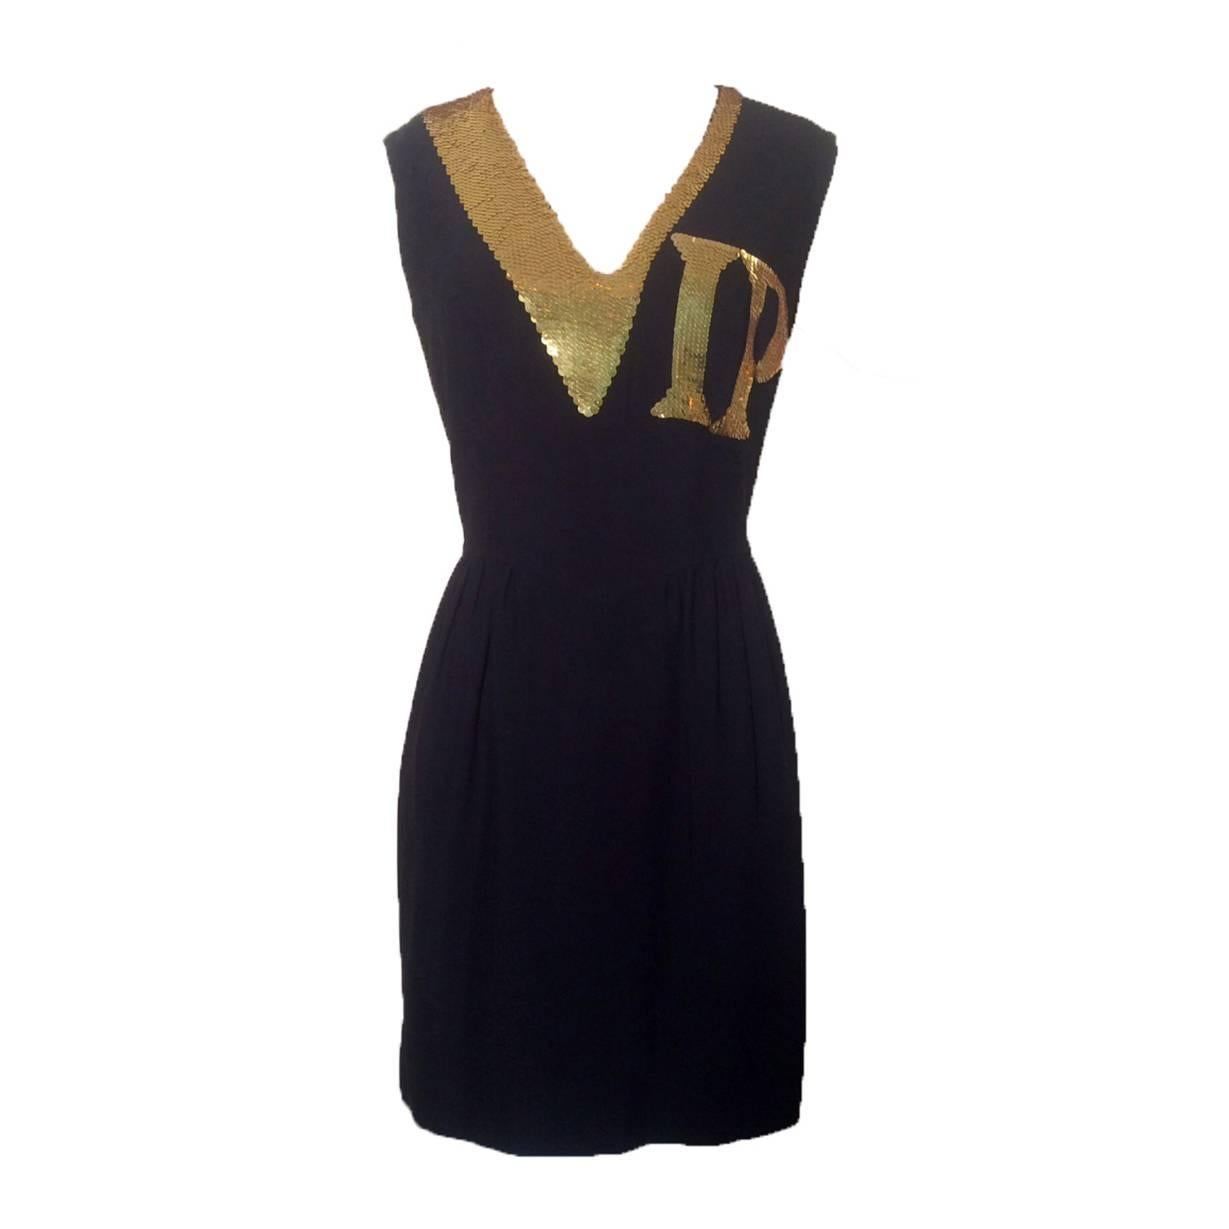 Moschino Couture VIP Black Gold Sequin Dress, 1990s 